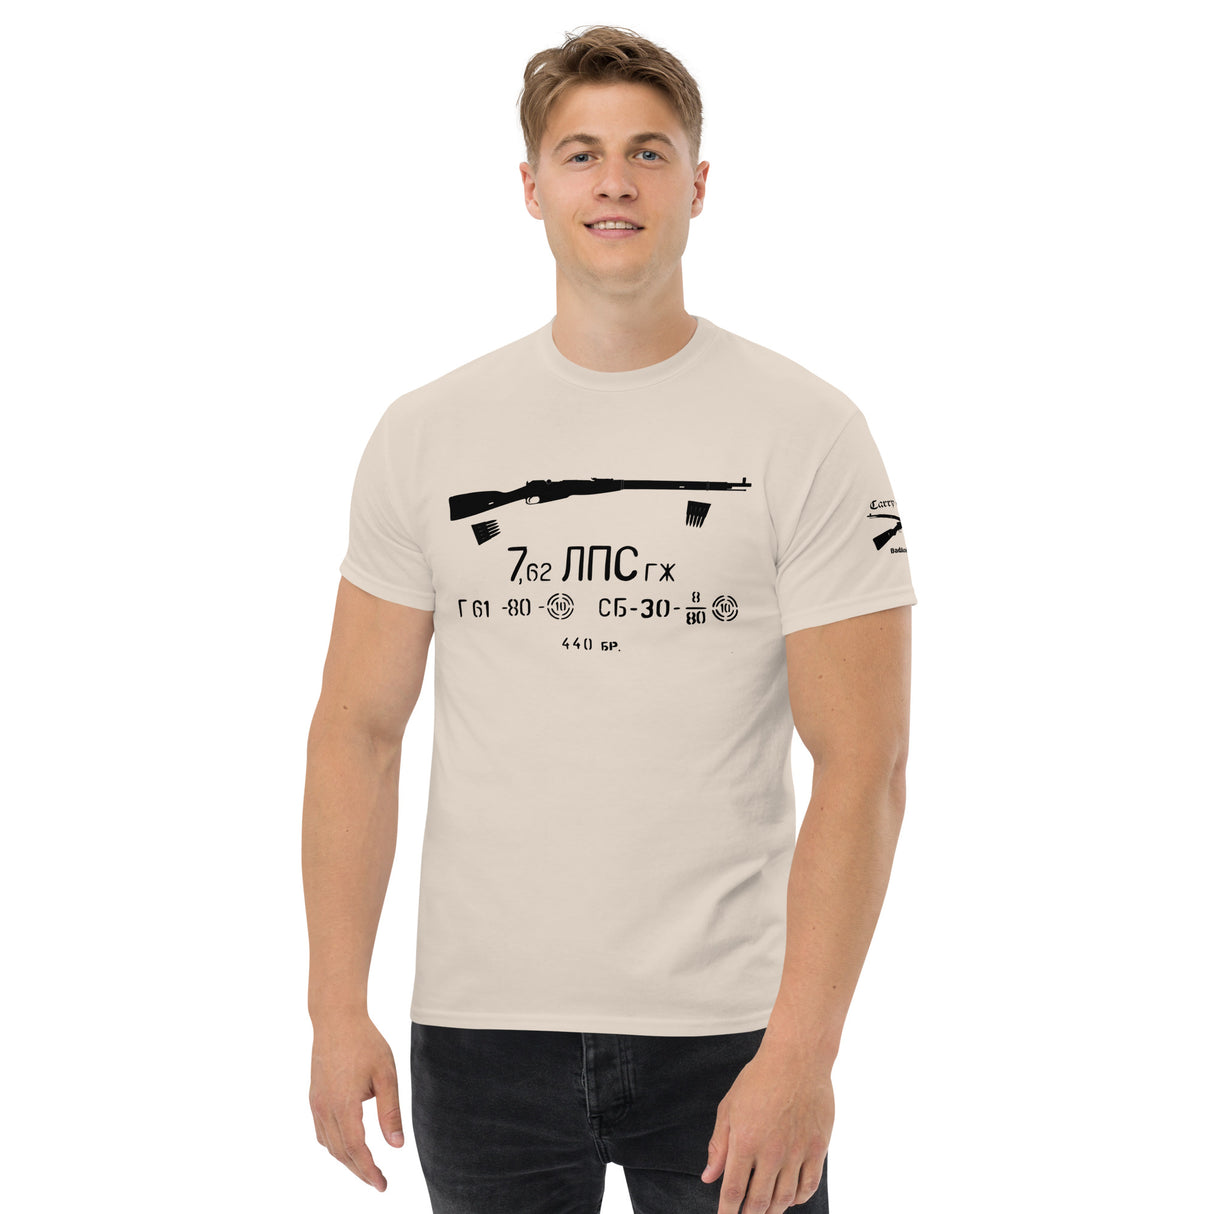 Mosin Nagant rifle cotton T-shirt with vintage ammo can labels dark font